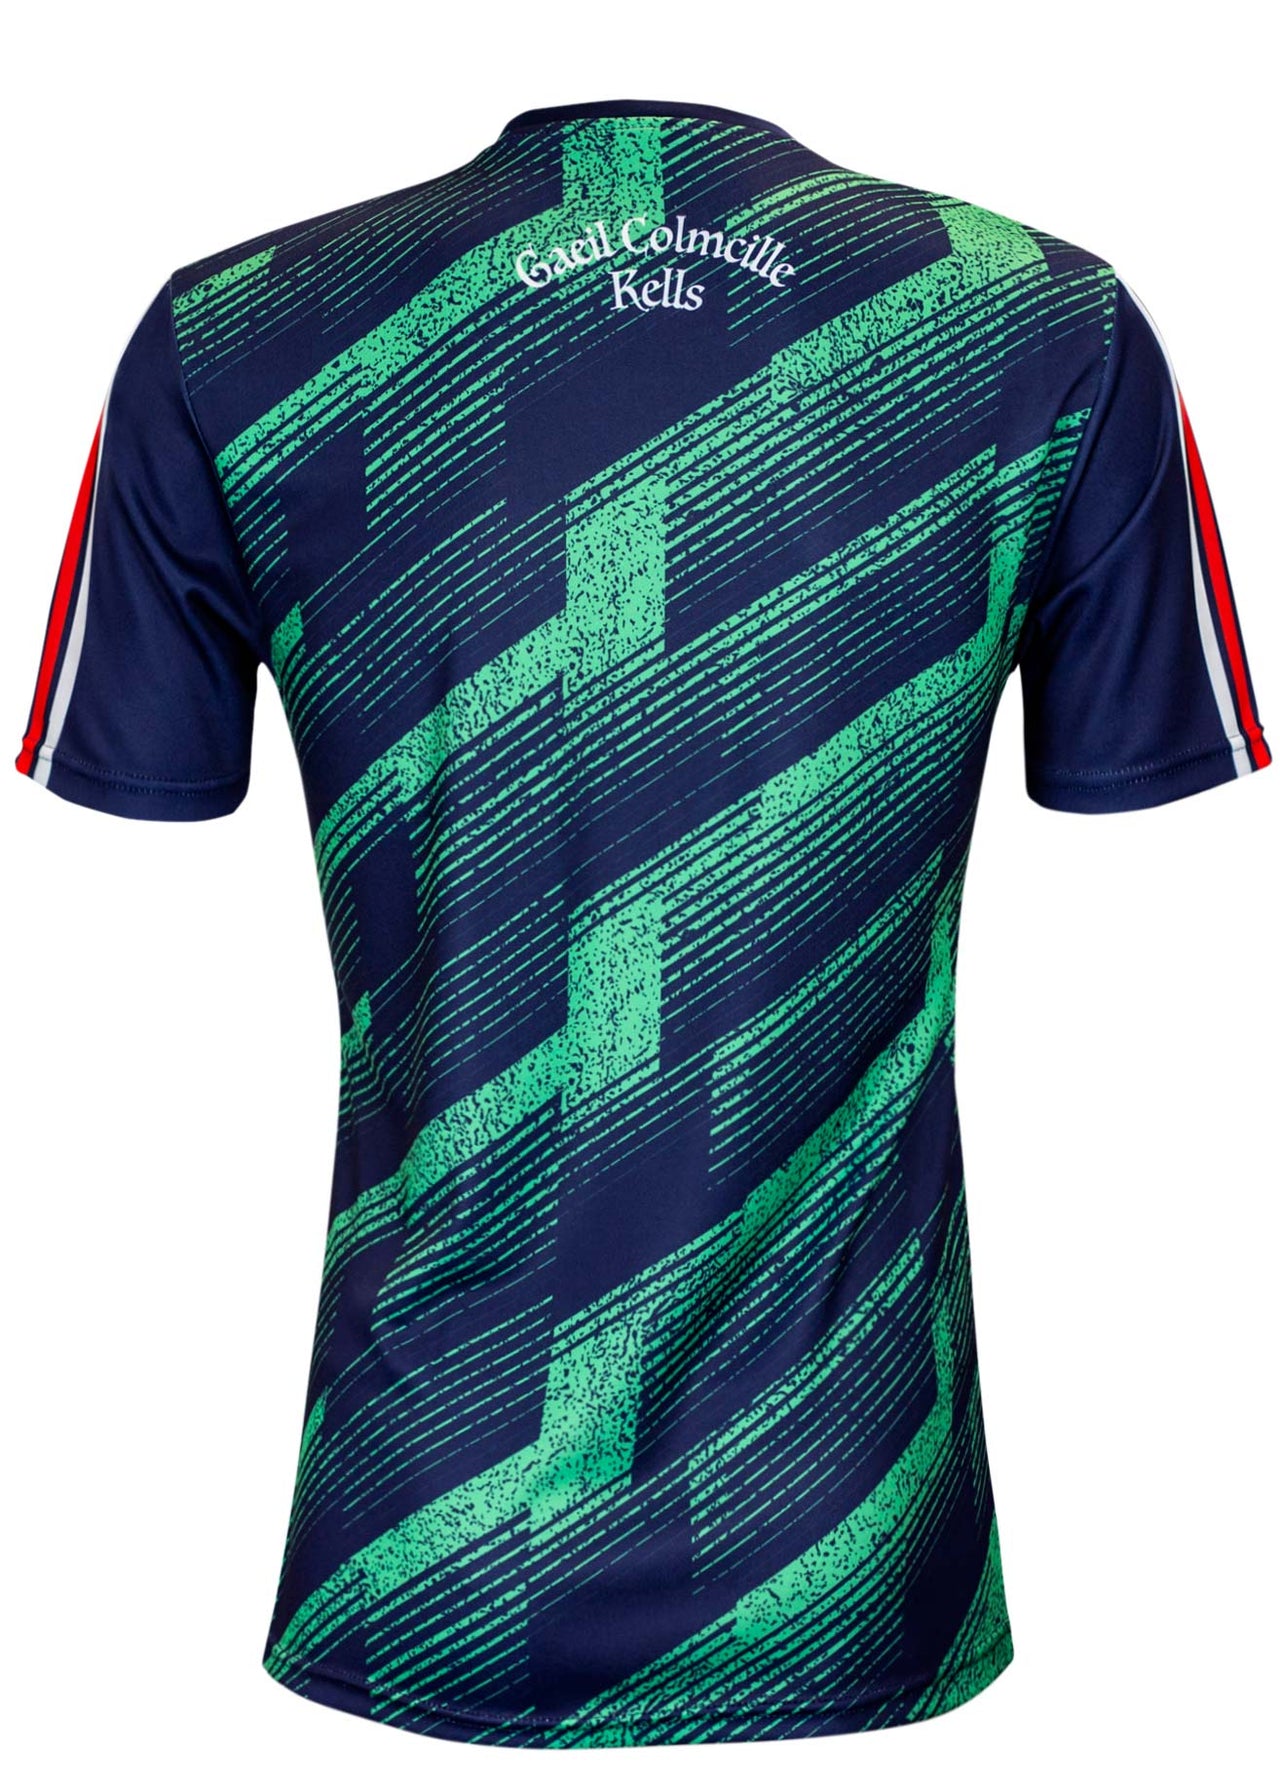 Gaeil Colmcille CLG Training Jersey Player Fit Adult